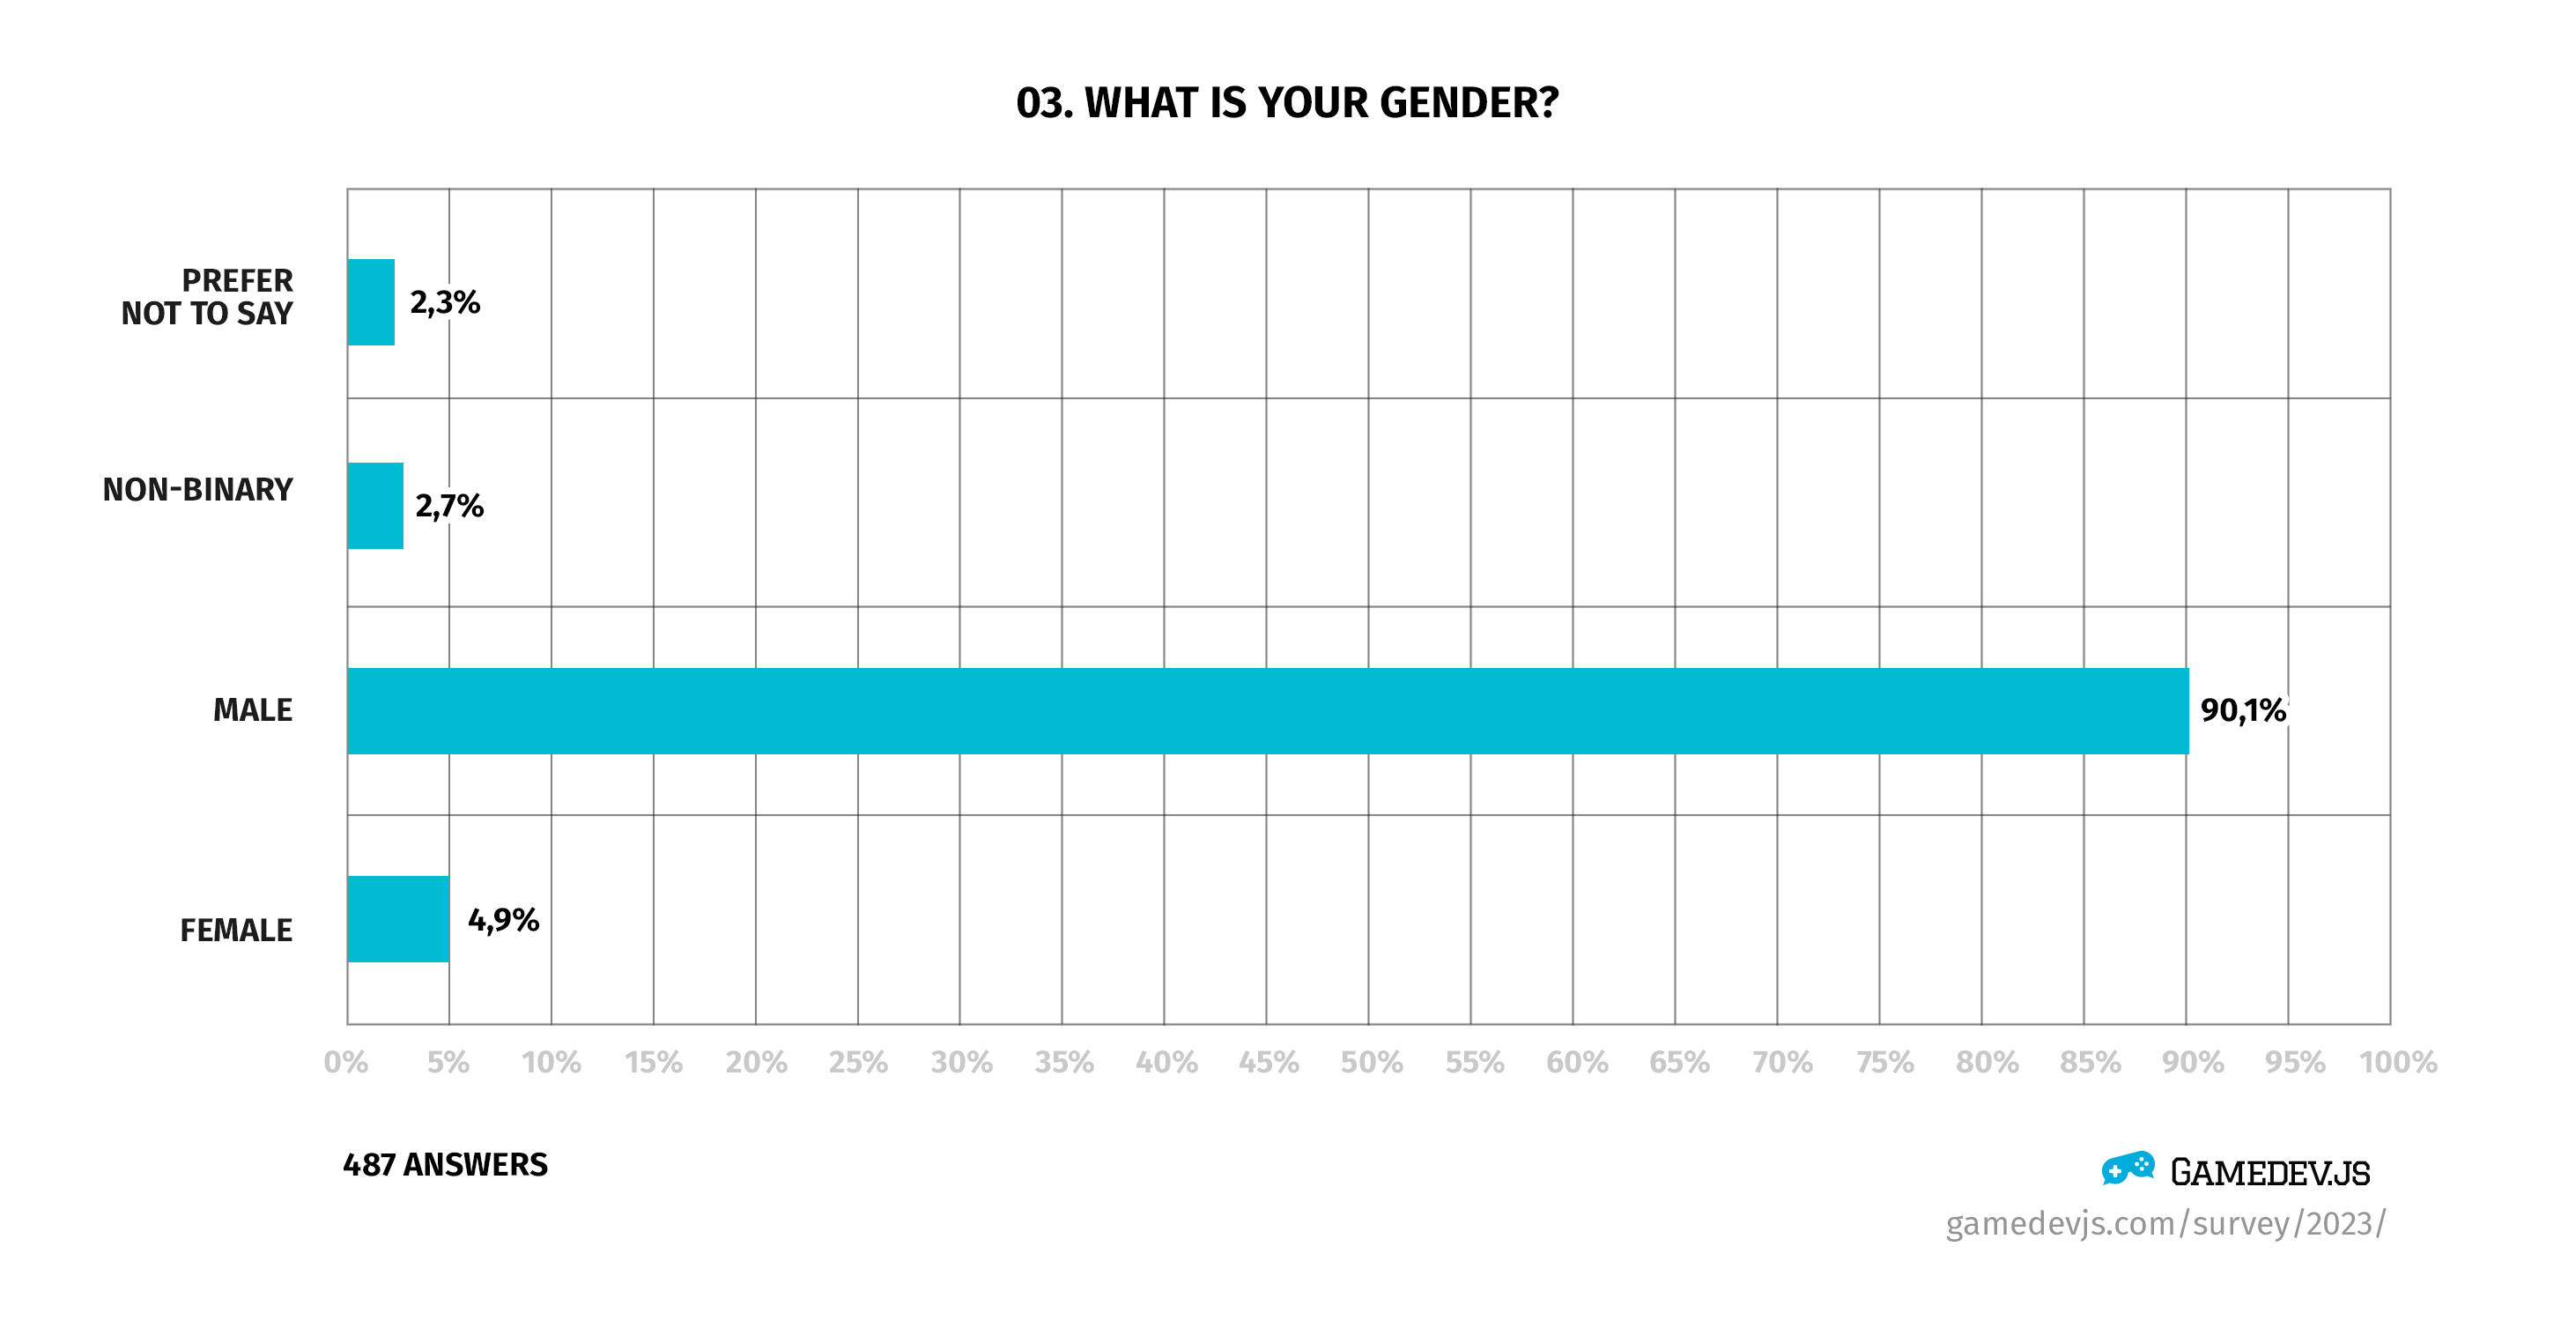 Gamedev.js Survey 2023 - Question #3: What is your gender?